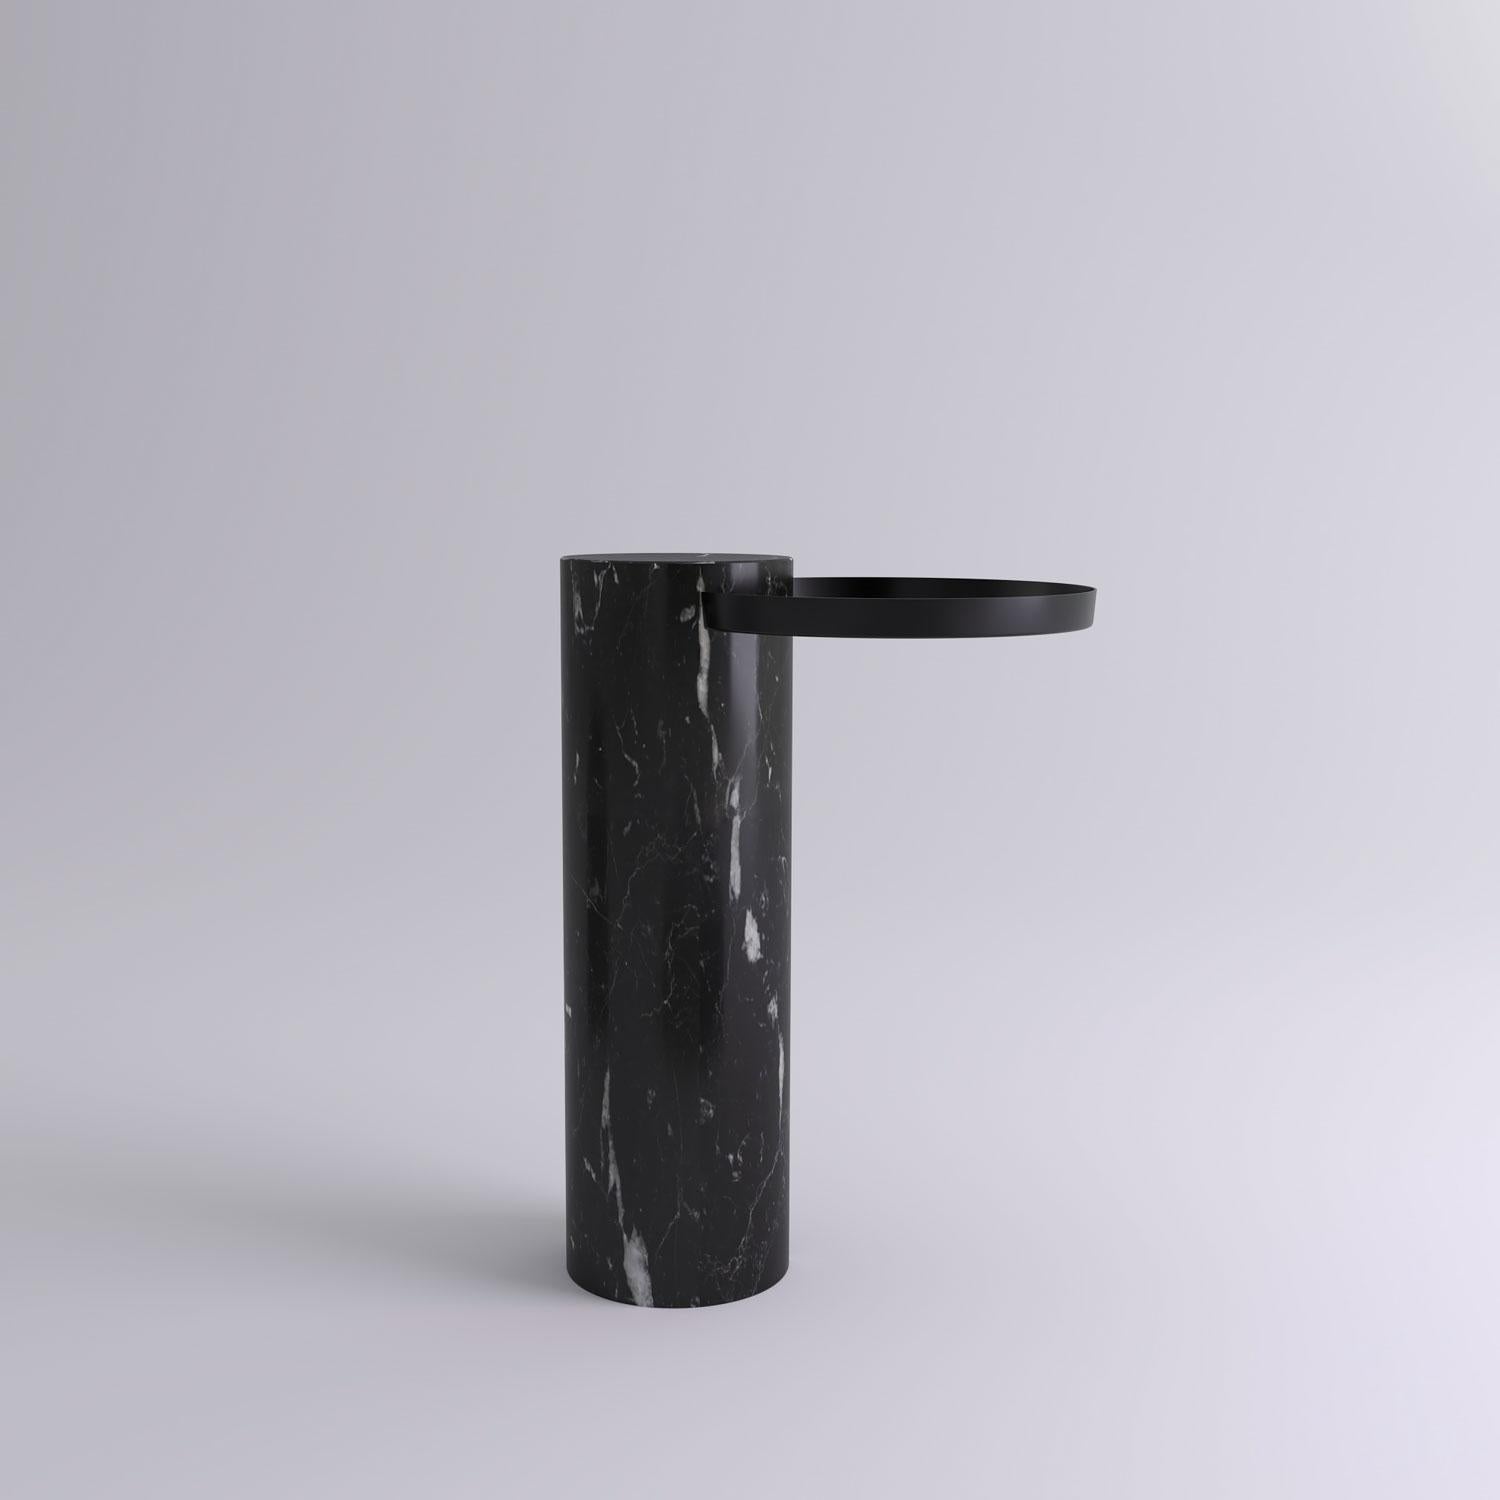 High black marquina marble contemporary guéridon, Sebastian Herkner
Dimensions: D 42 x H 57 cm
Materials: Black Marquina marble, black metal tray

The salute table exists in 3 sizes, 4 different marble stones for the column and 5 different